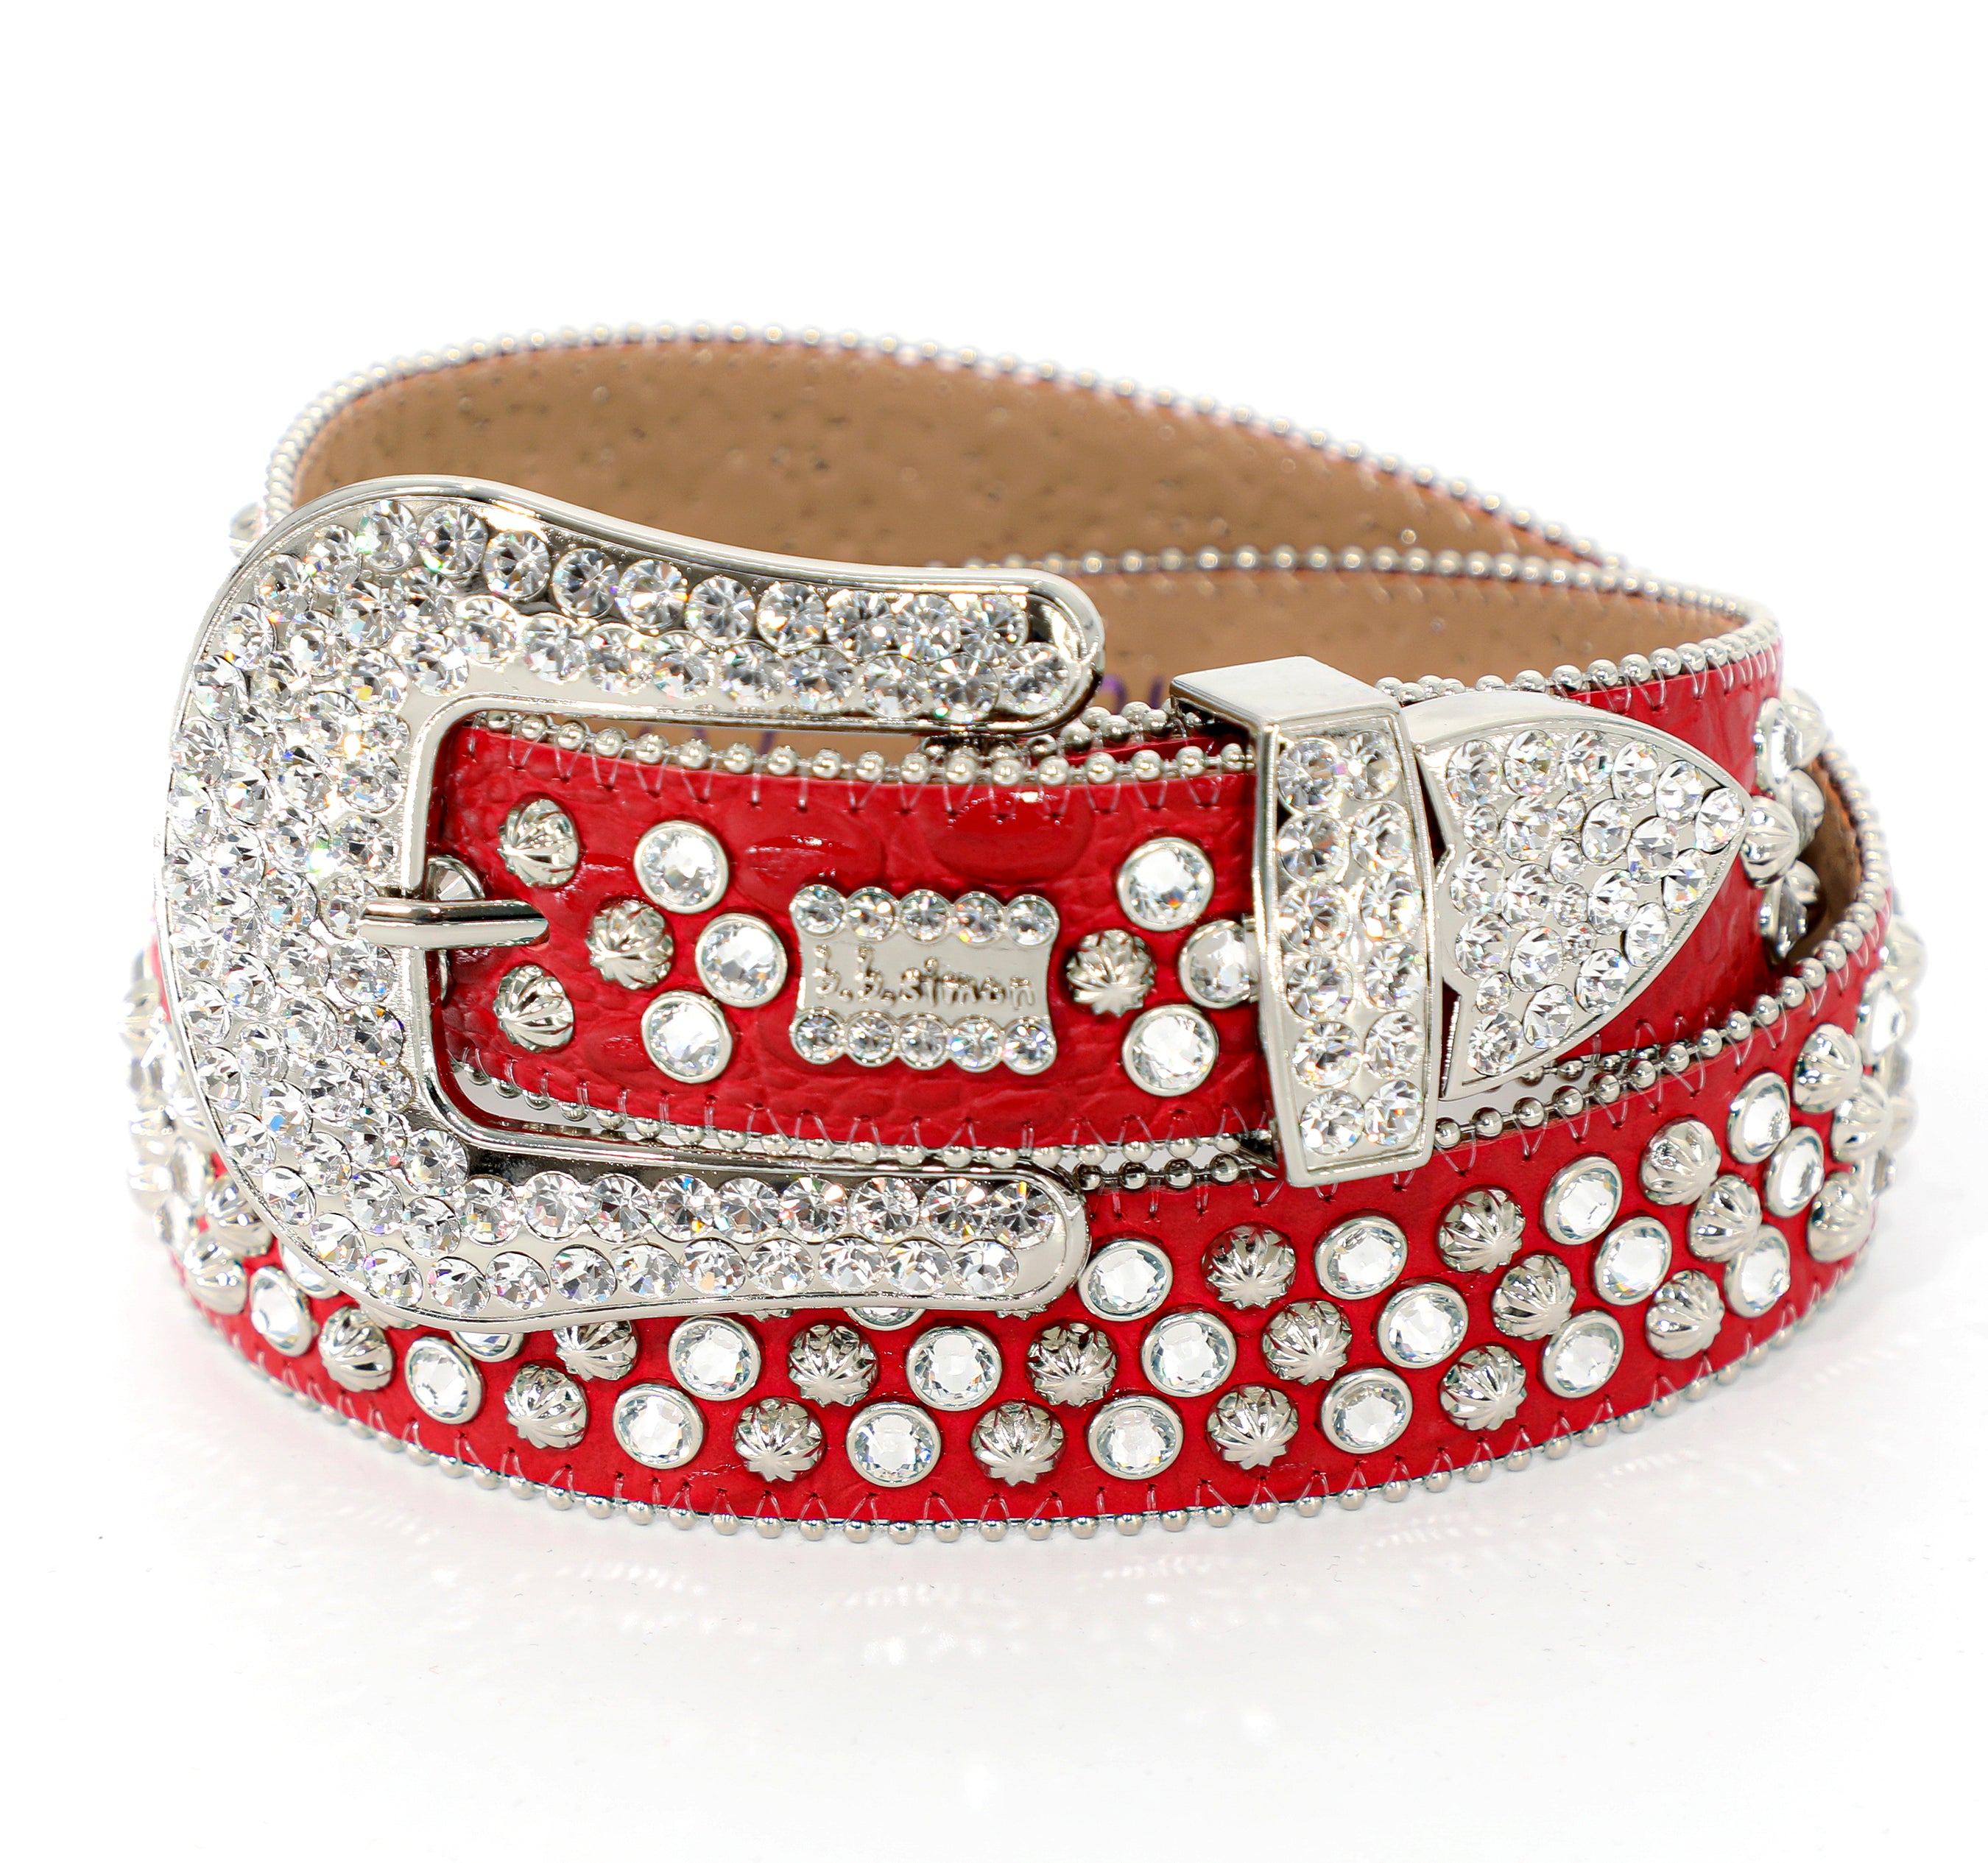 B.B SIMON RED BELT W/ ALL SILVER CRYSTALS AND PARACHUTE STUDS